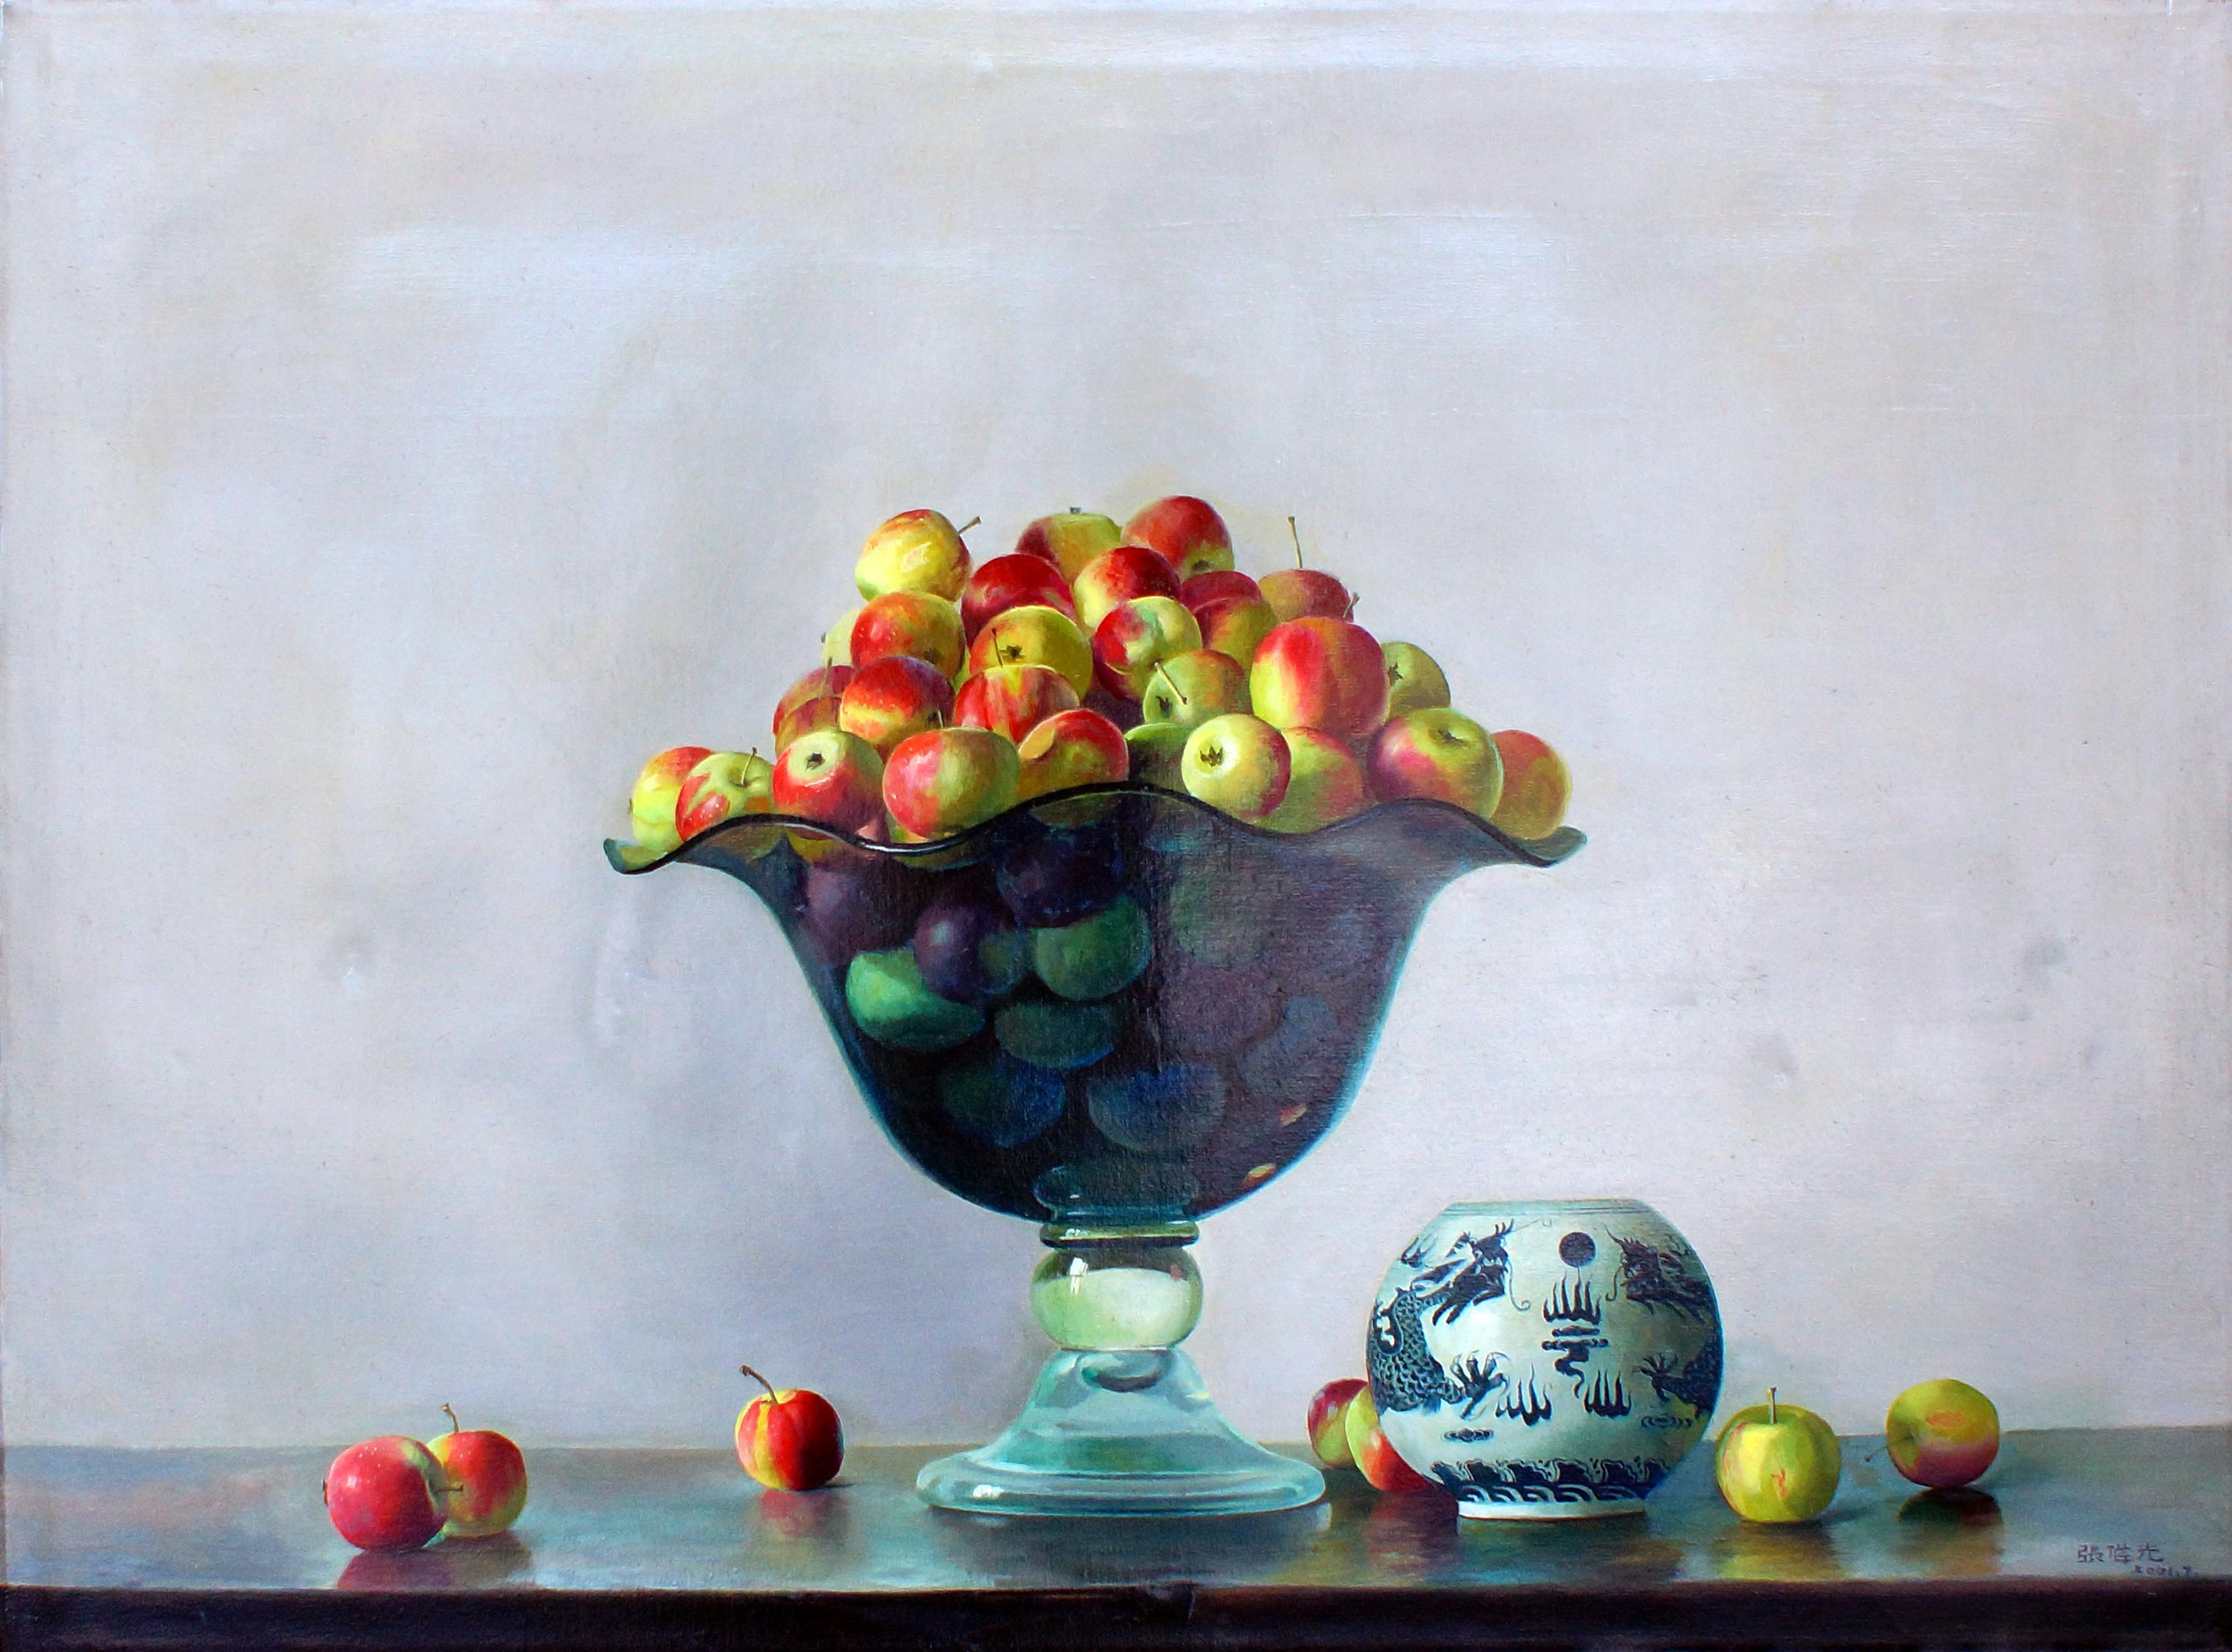 Crystal Vase with apples - Oil on Canvas - 2001